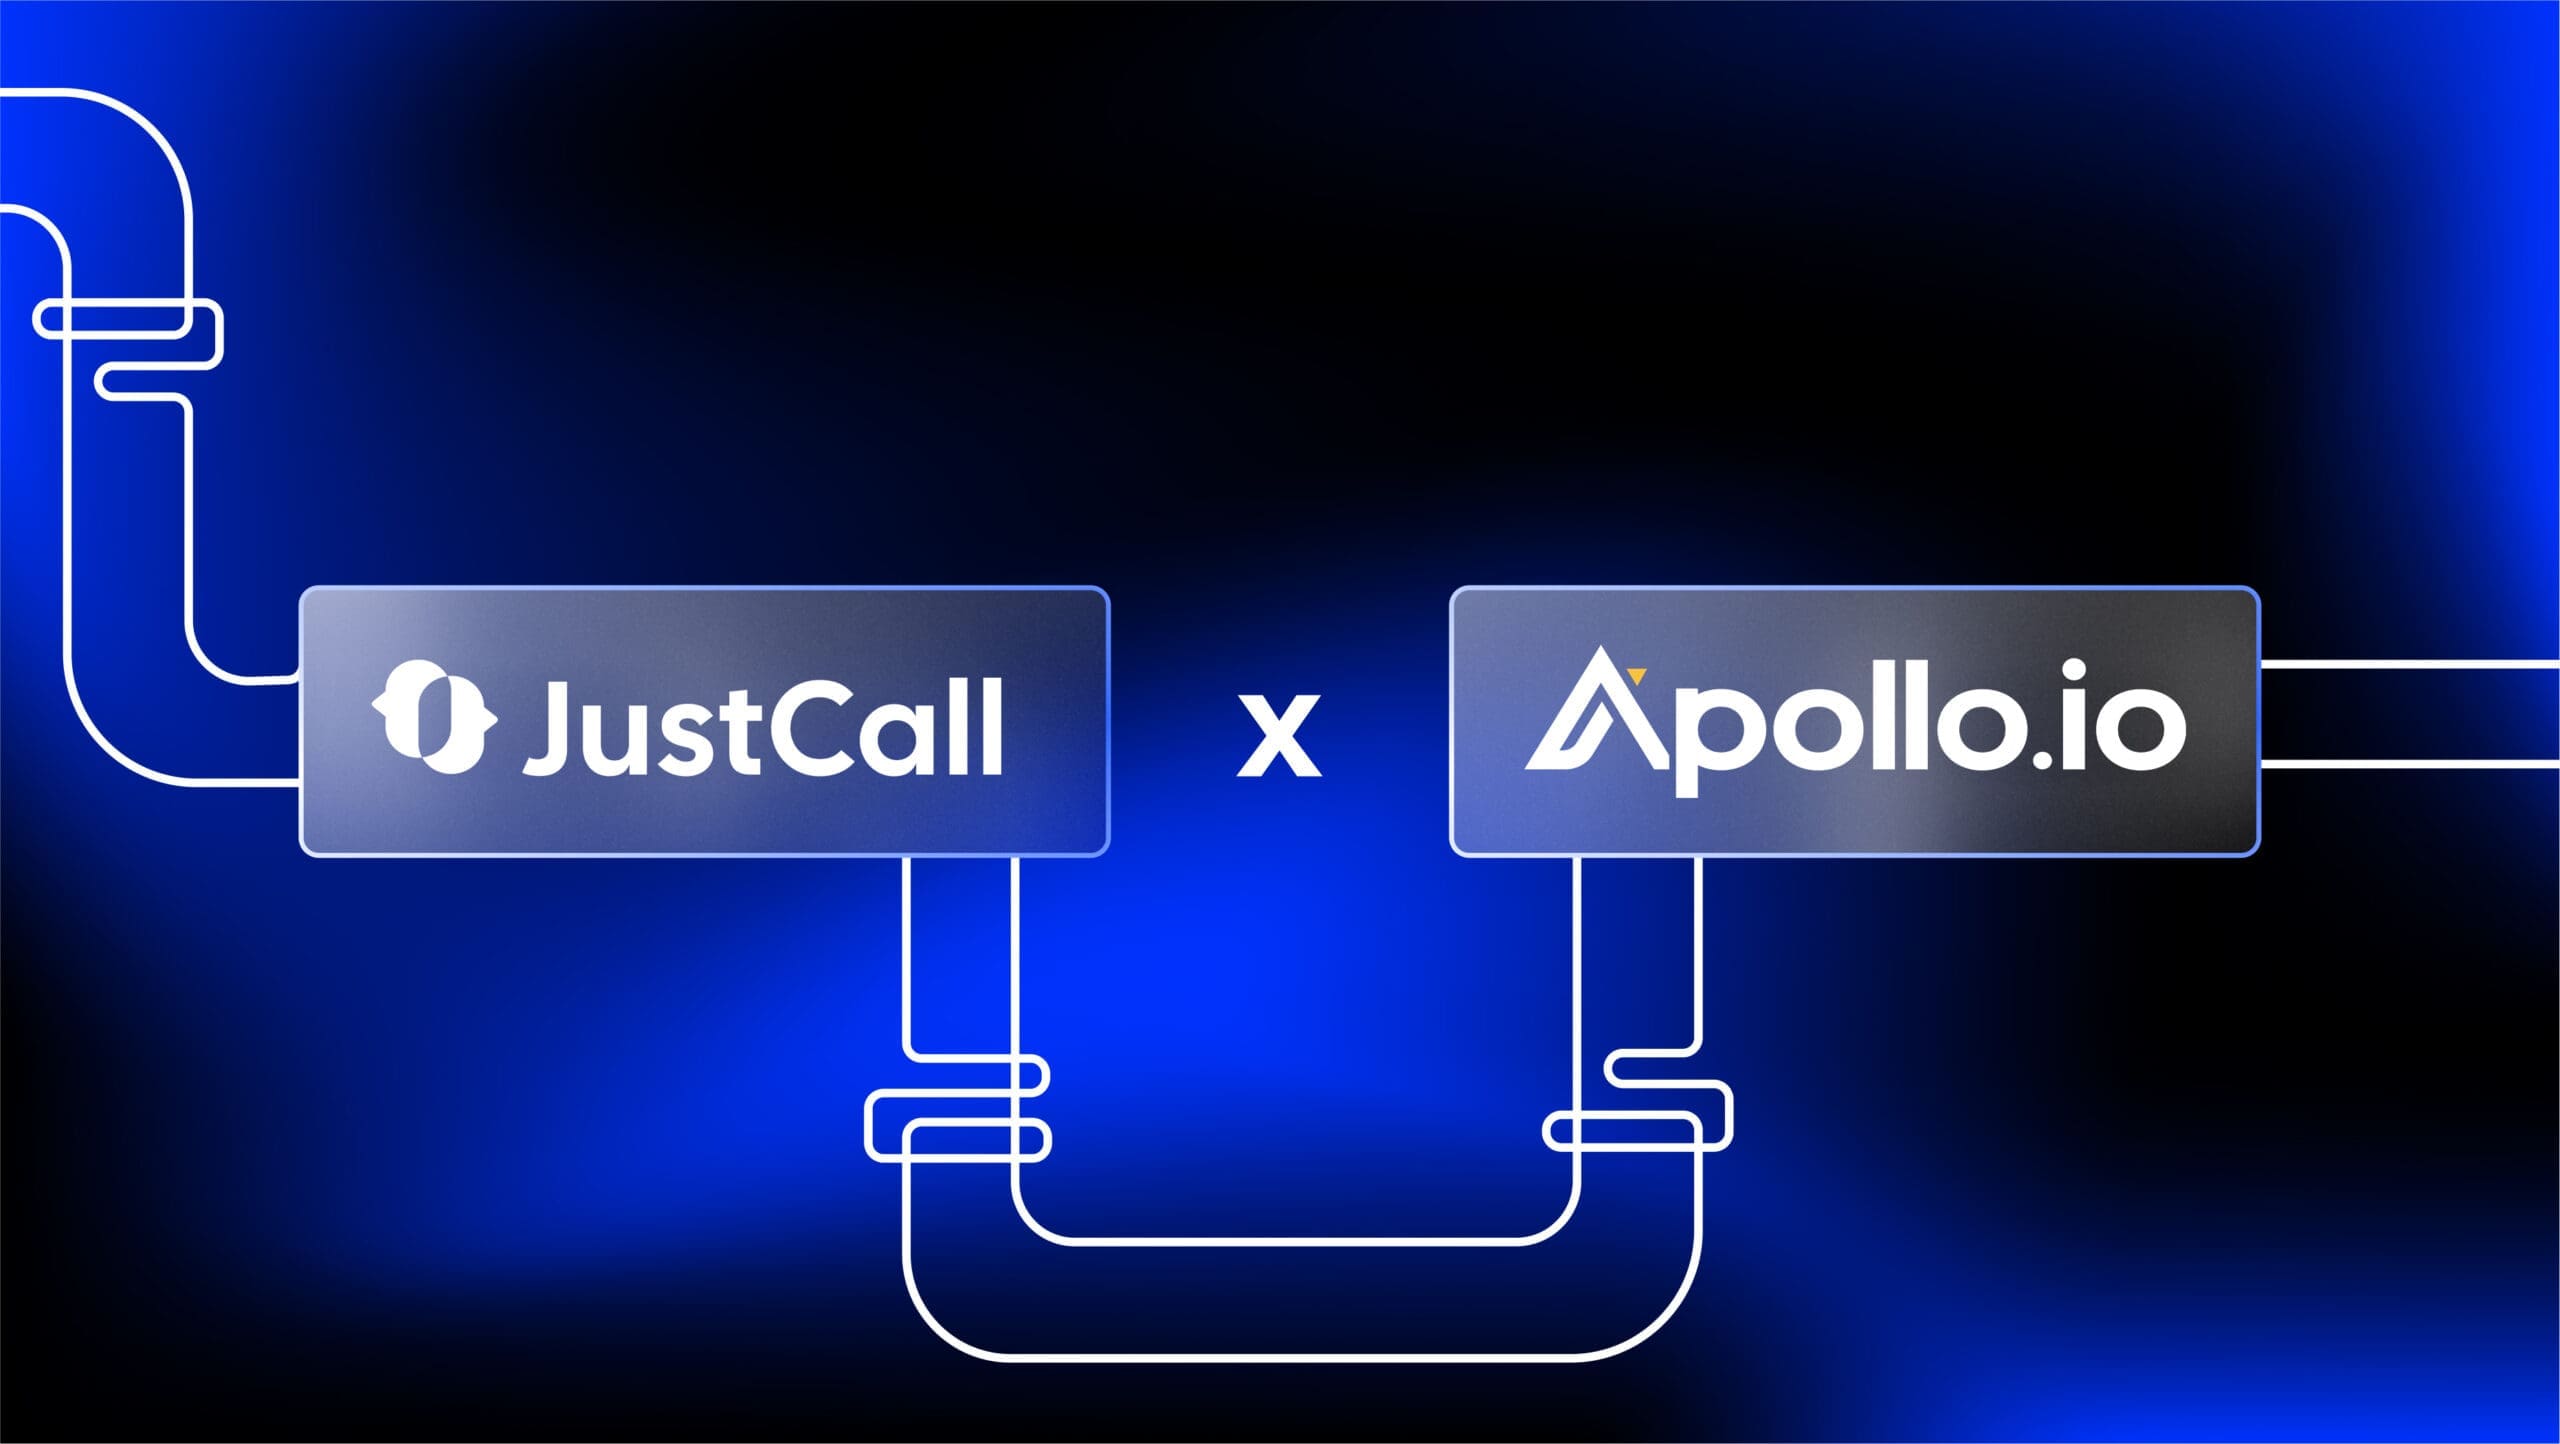 Four Ways to Combine JustCall and Apollo for Smarter, Simpler Sales